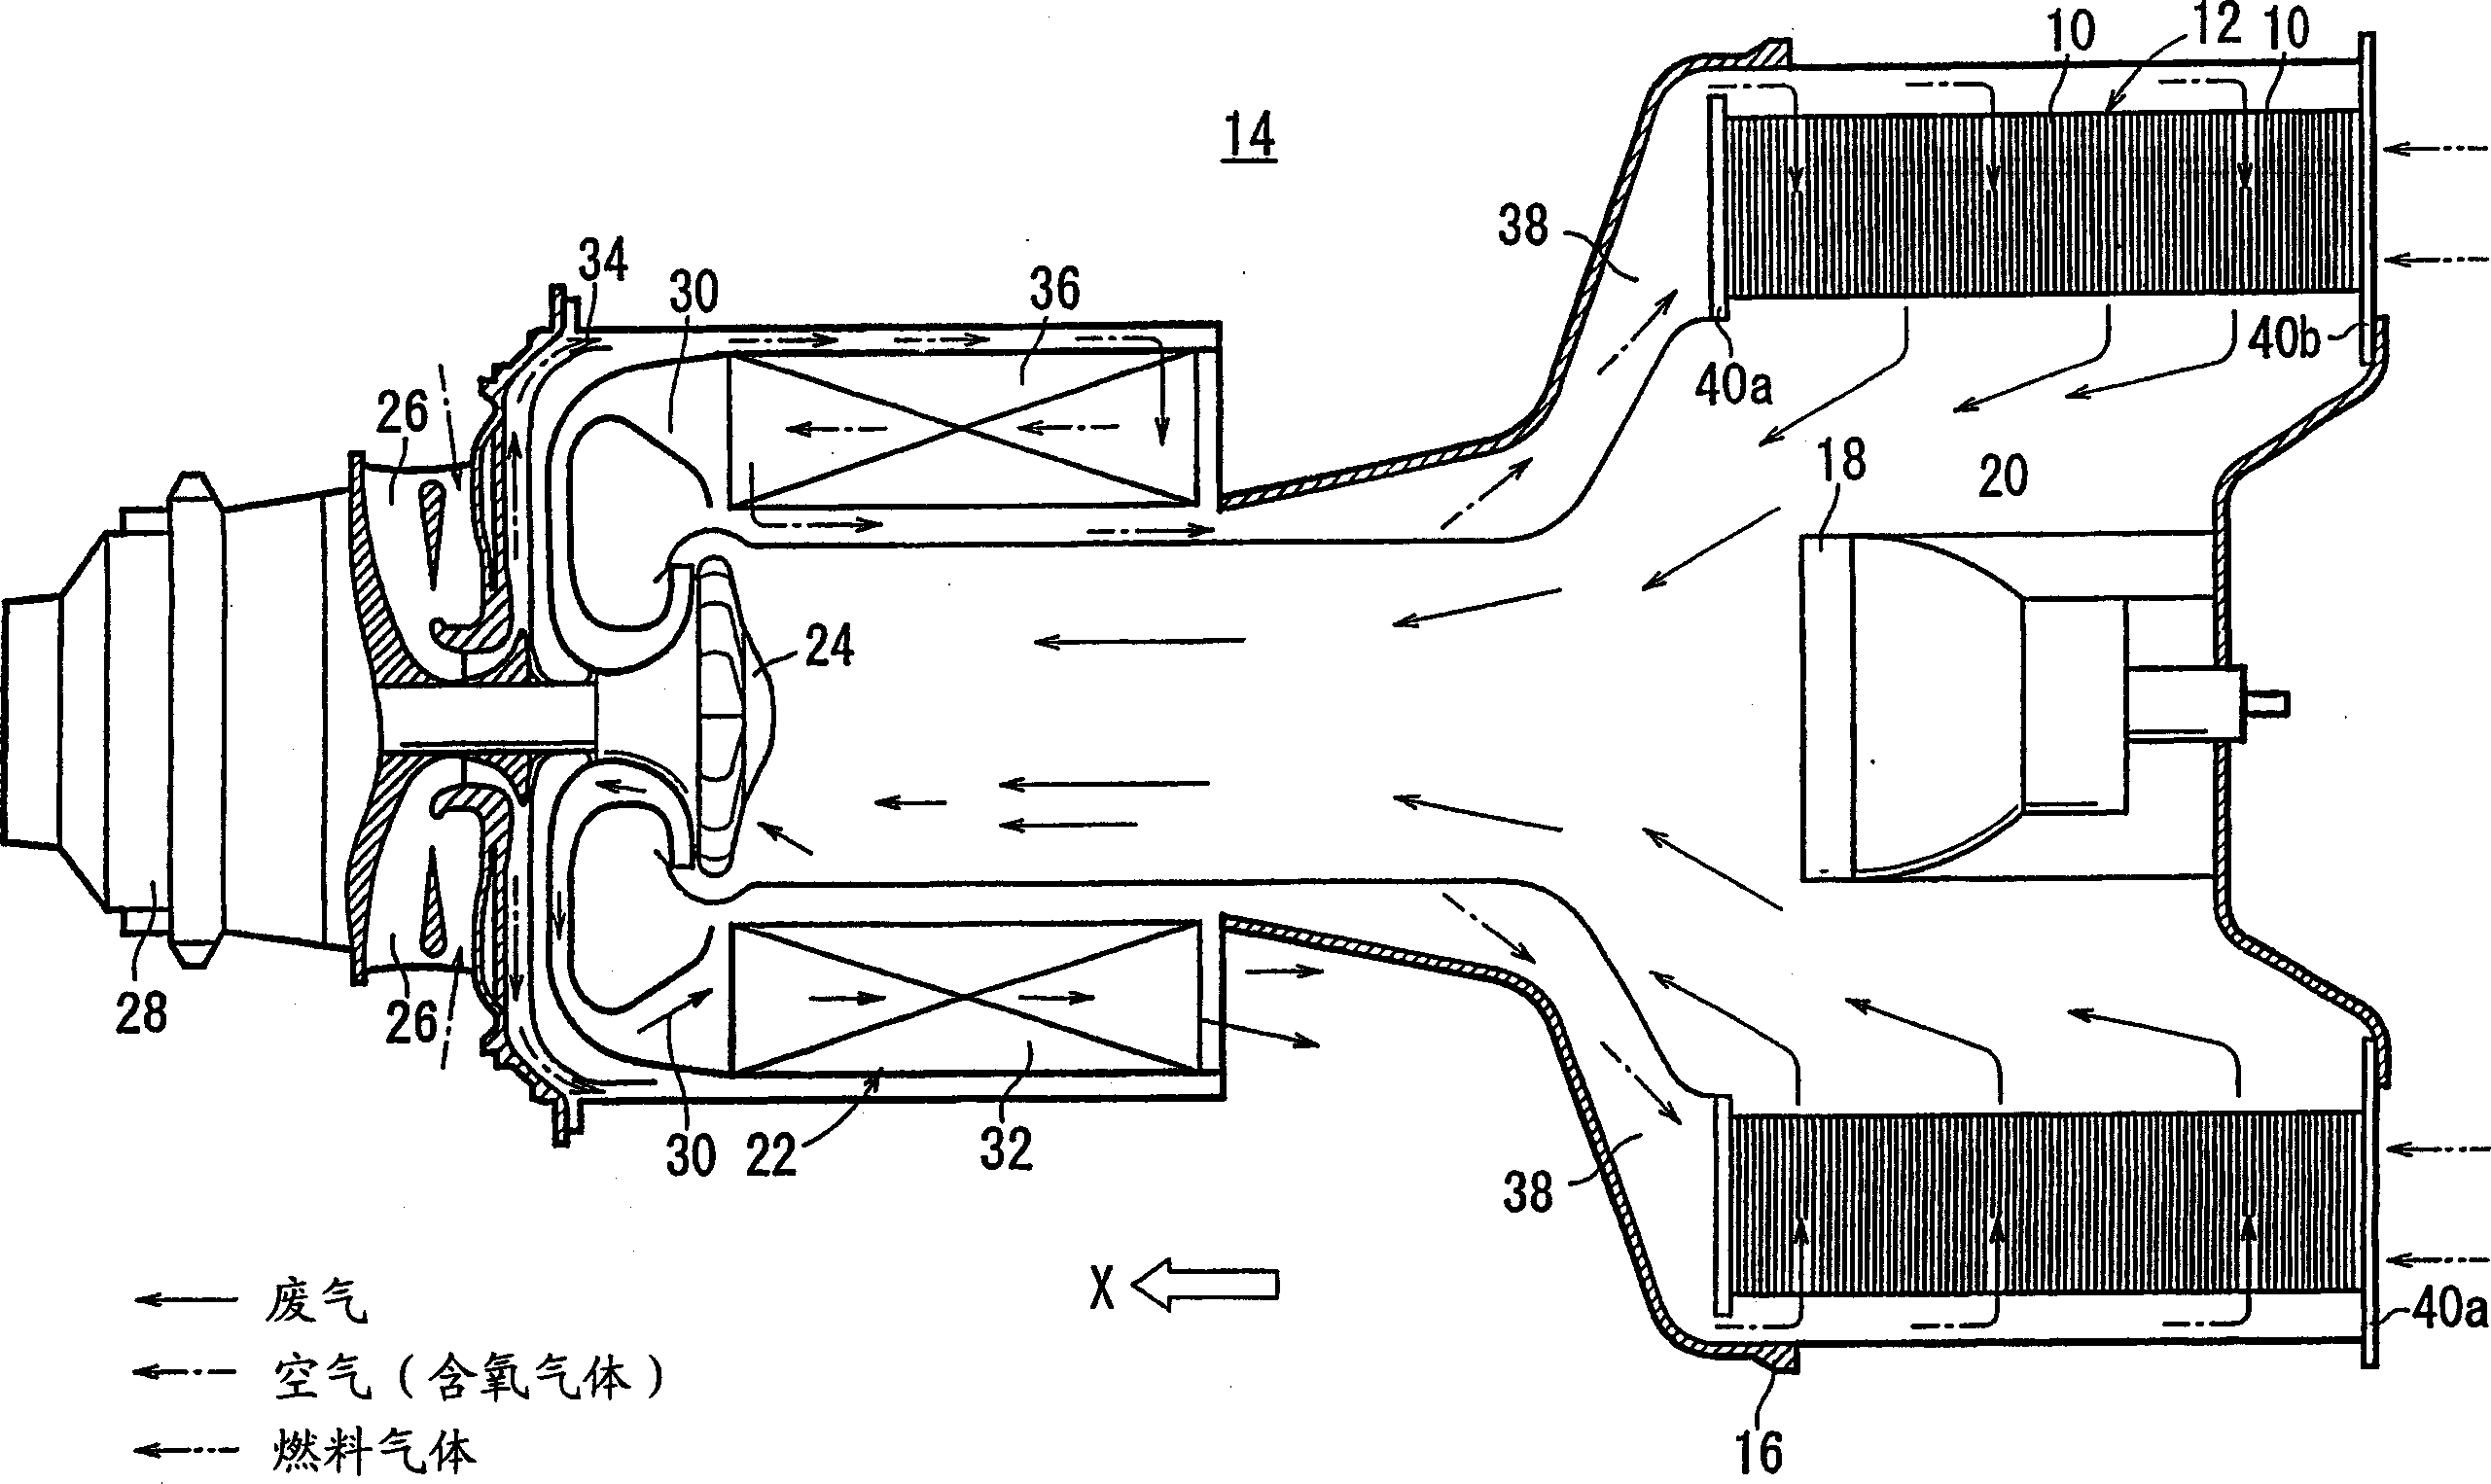 Separator for SOFC with internal reactant gas flow passages